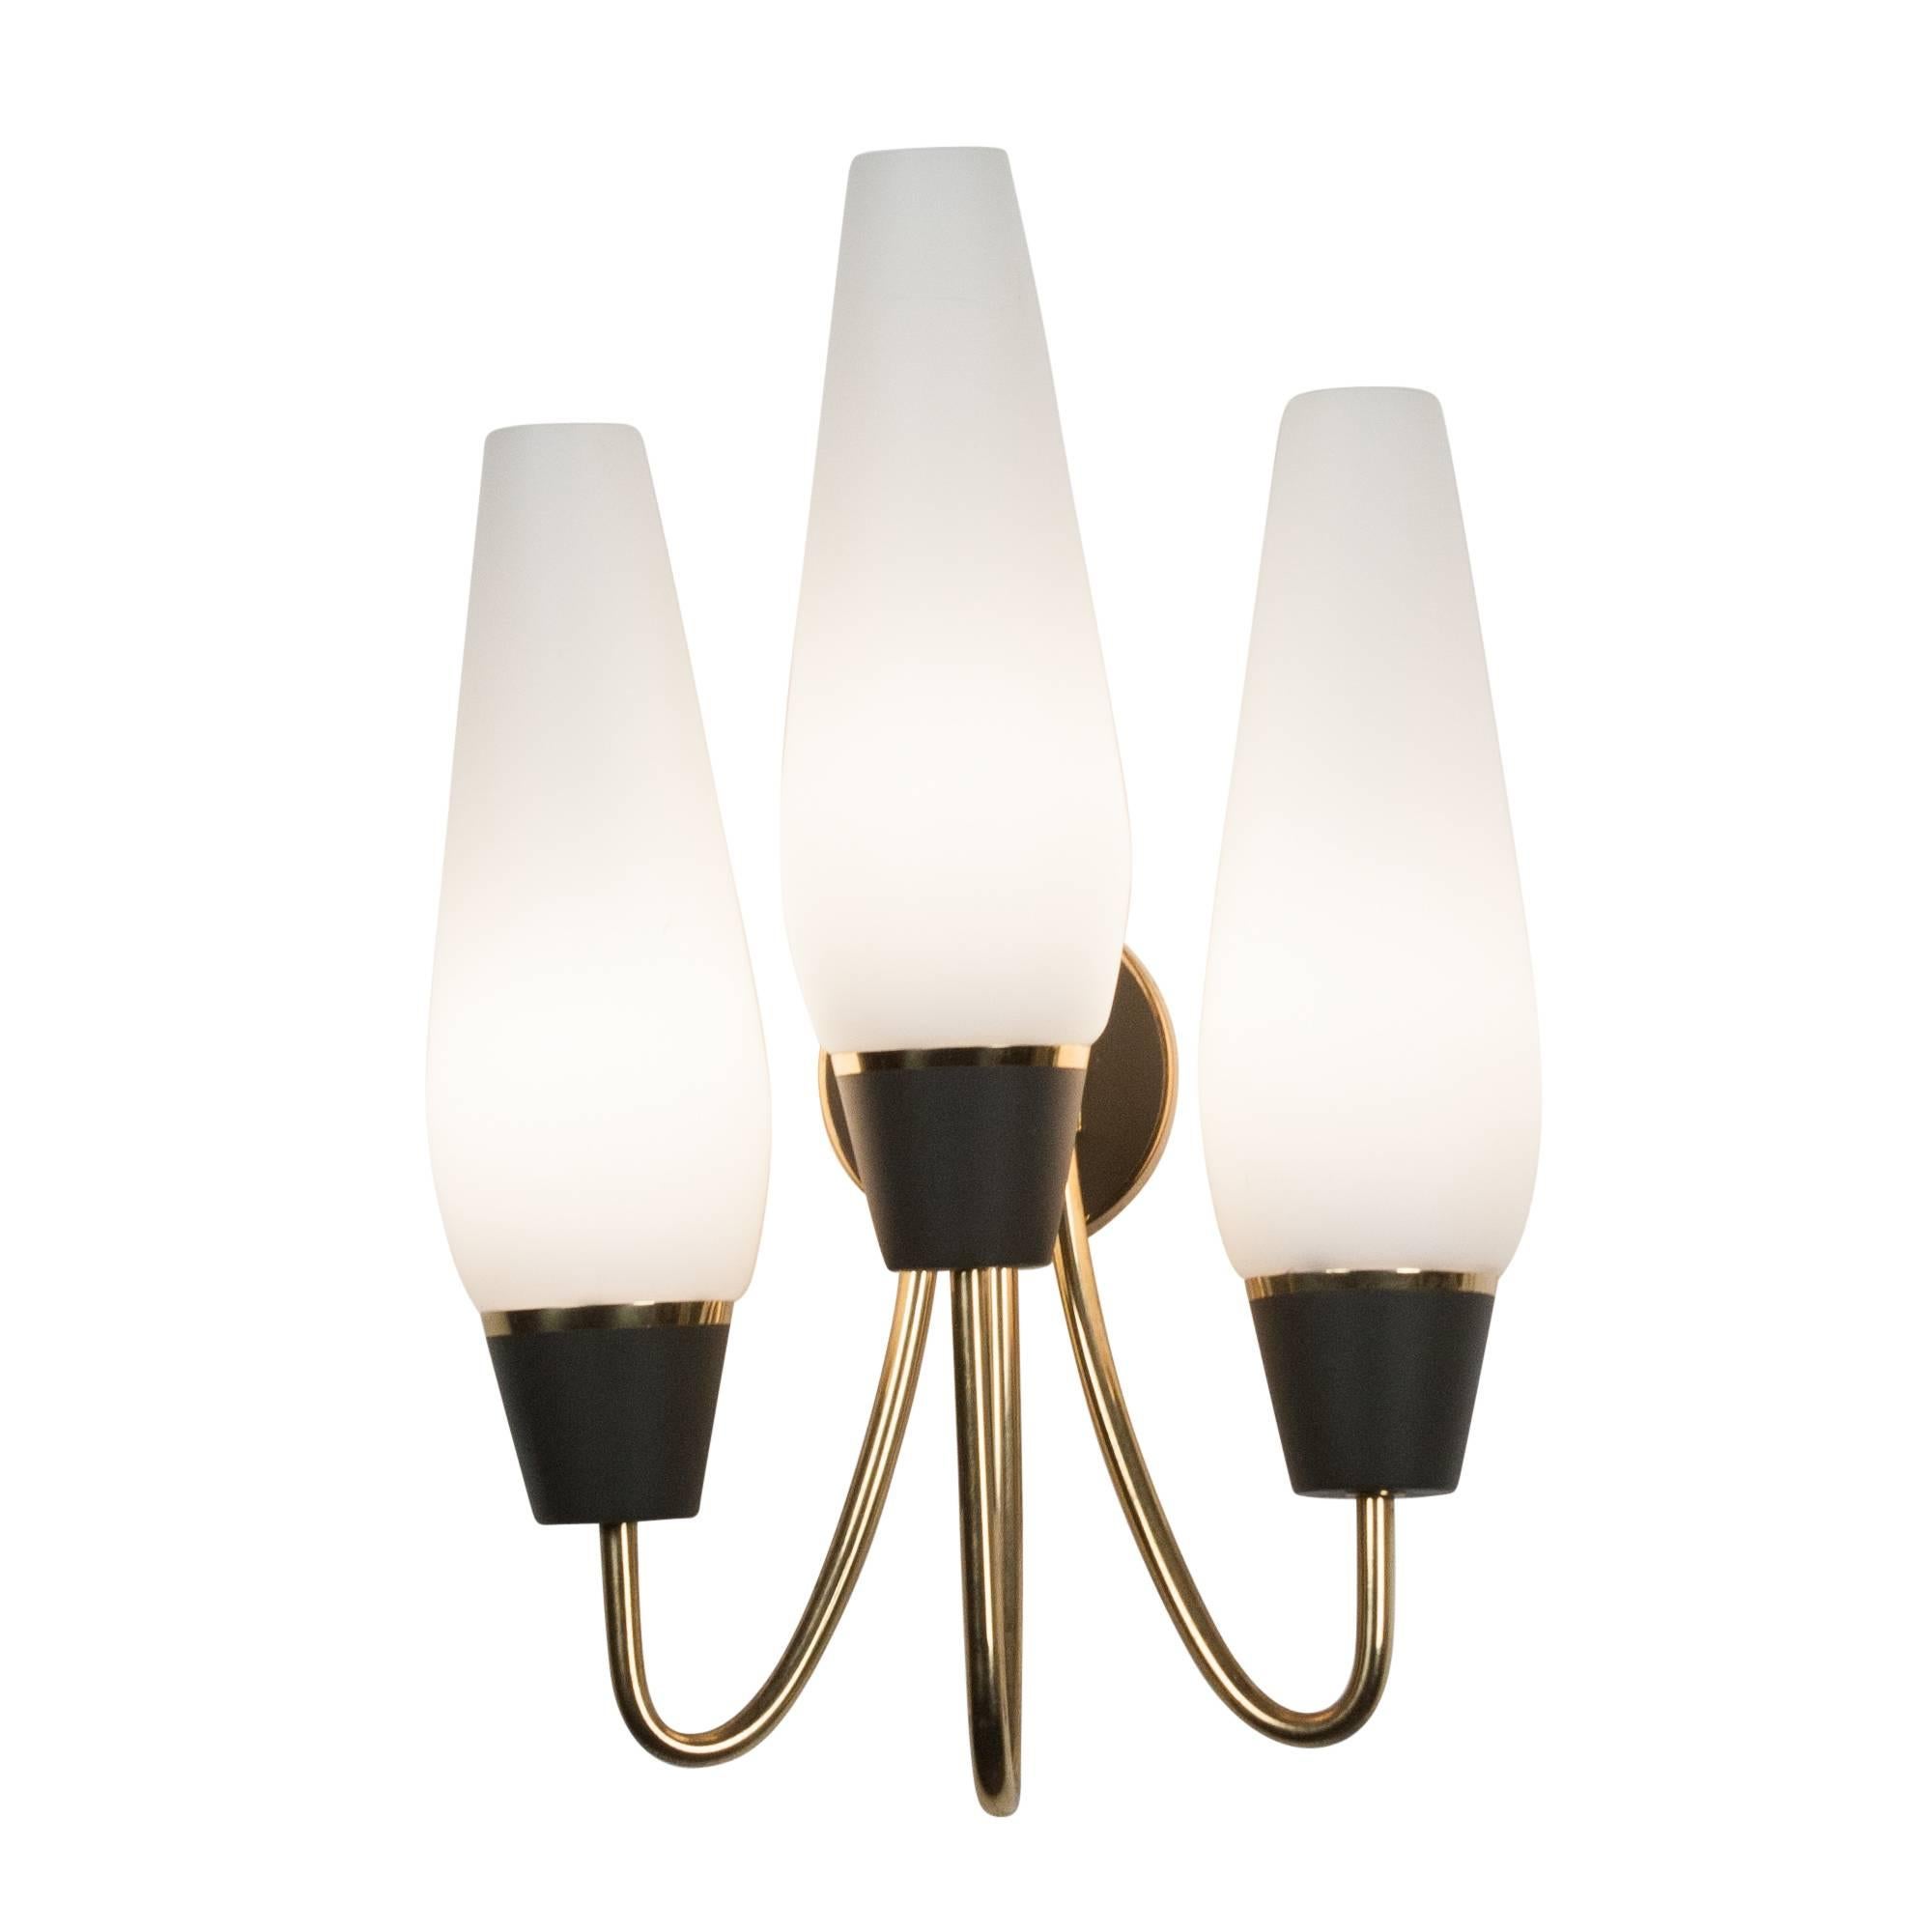 Pair of three-arm wall sconces, curved brass arms leading to black metal housing which supports a frosted glass tapered shade, German 1960s. Measures: Overall height 13 in, width 8 in, depth 5 1/2 in.

A third matching sconce available.